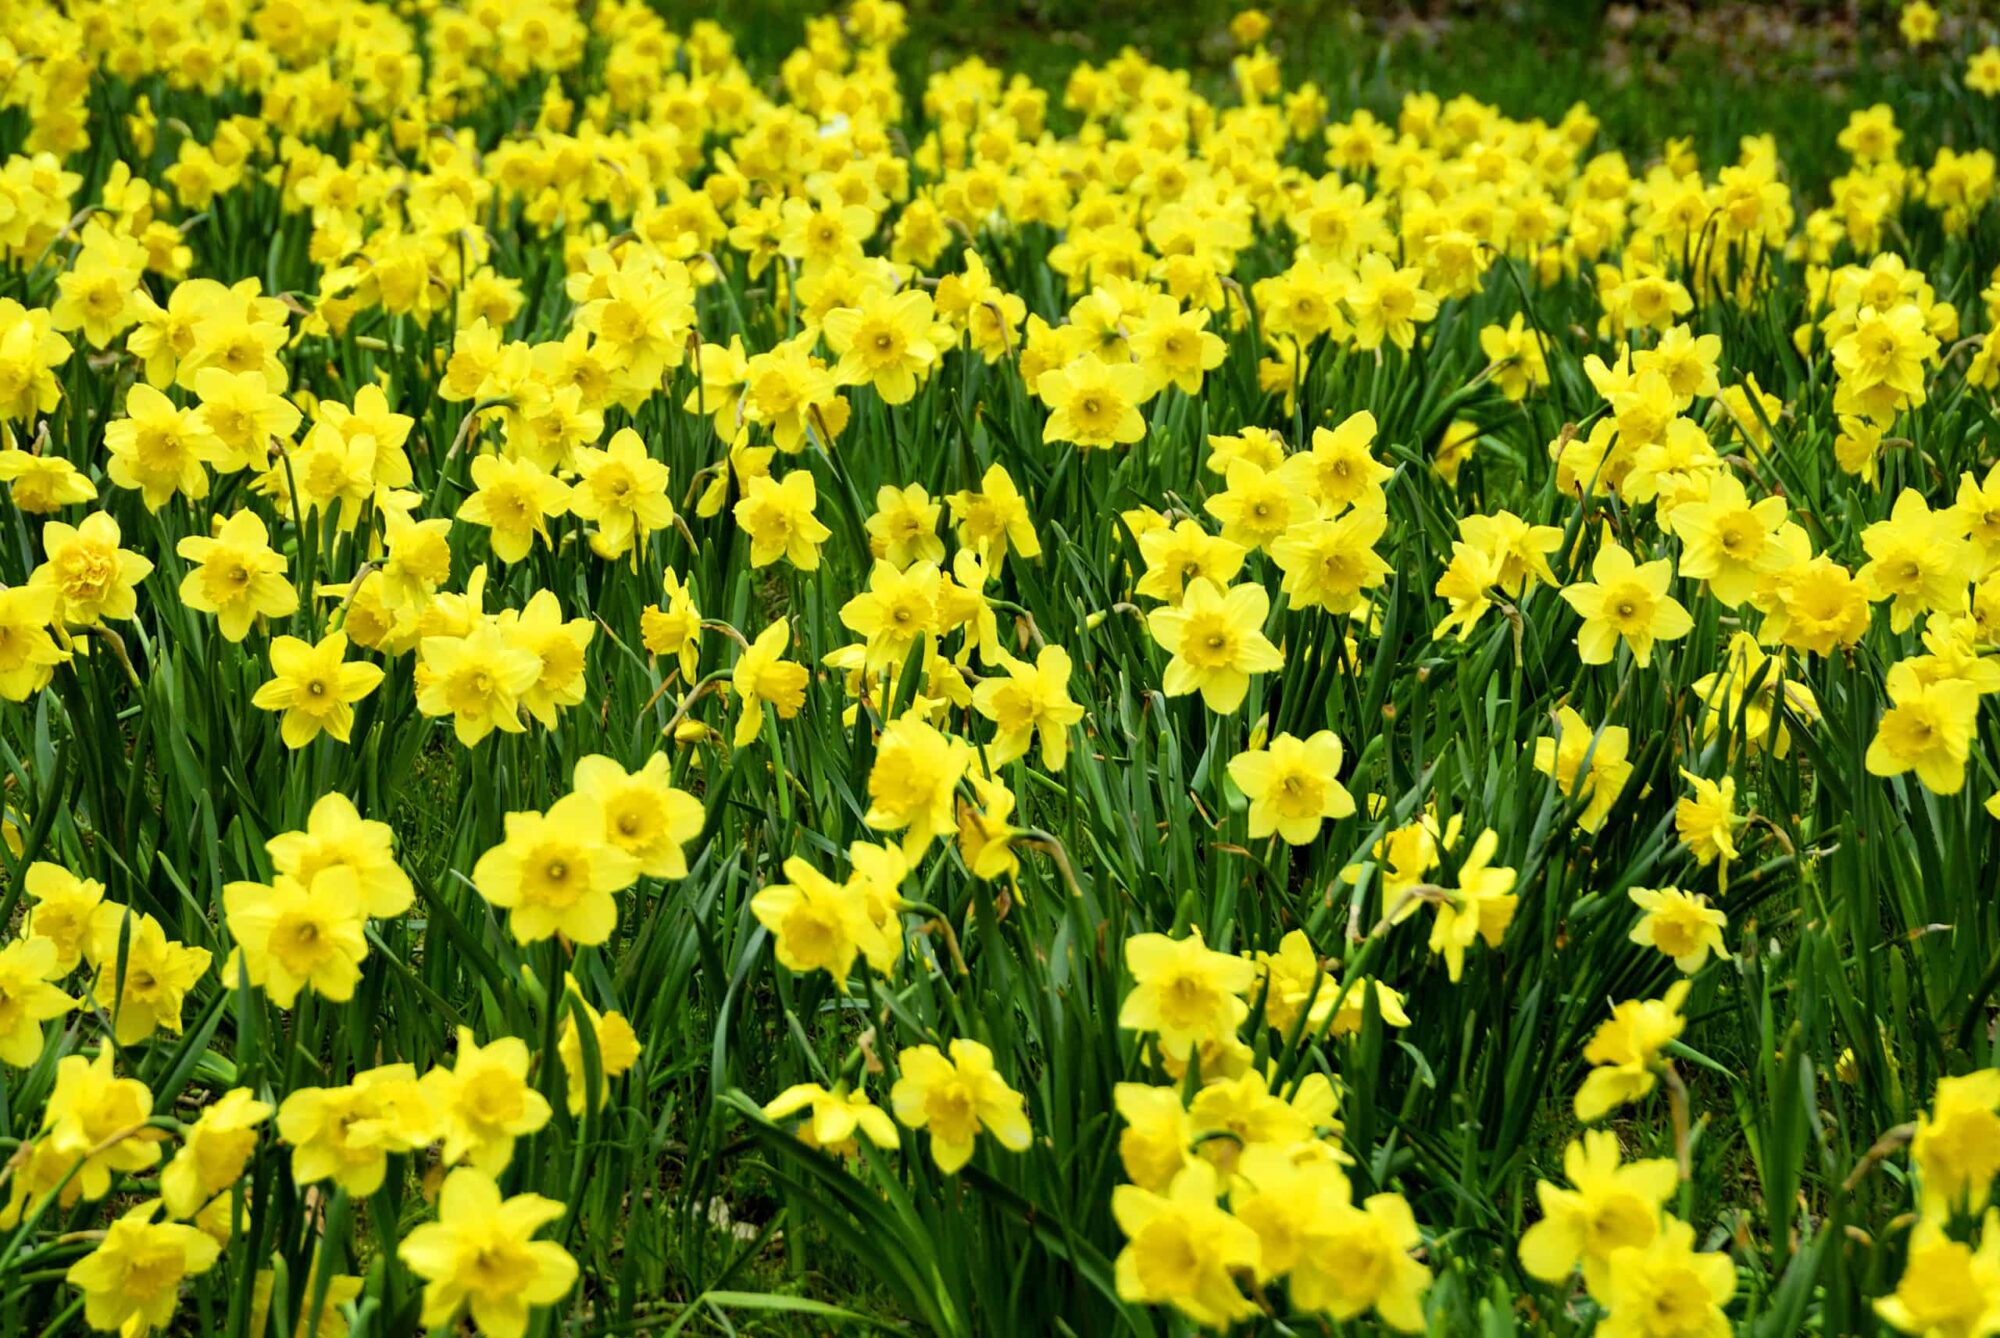 Narcissus vs Daffodil: Is There a Difference? - A-Z Animals